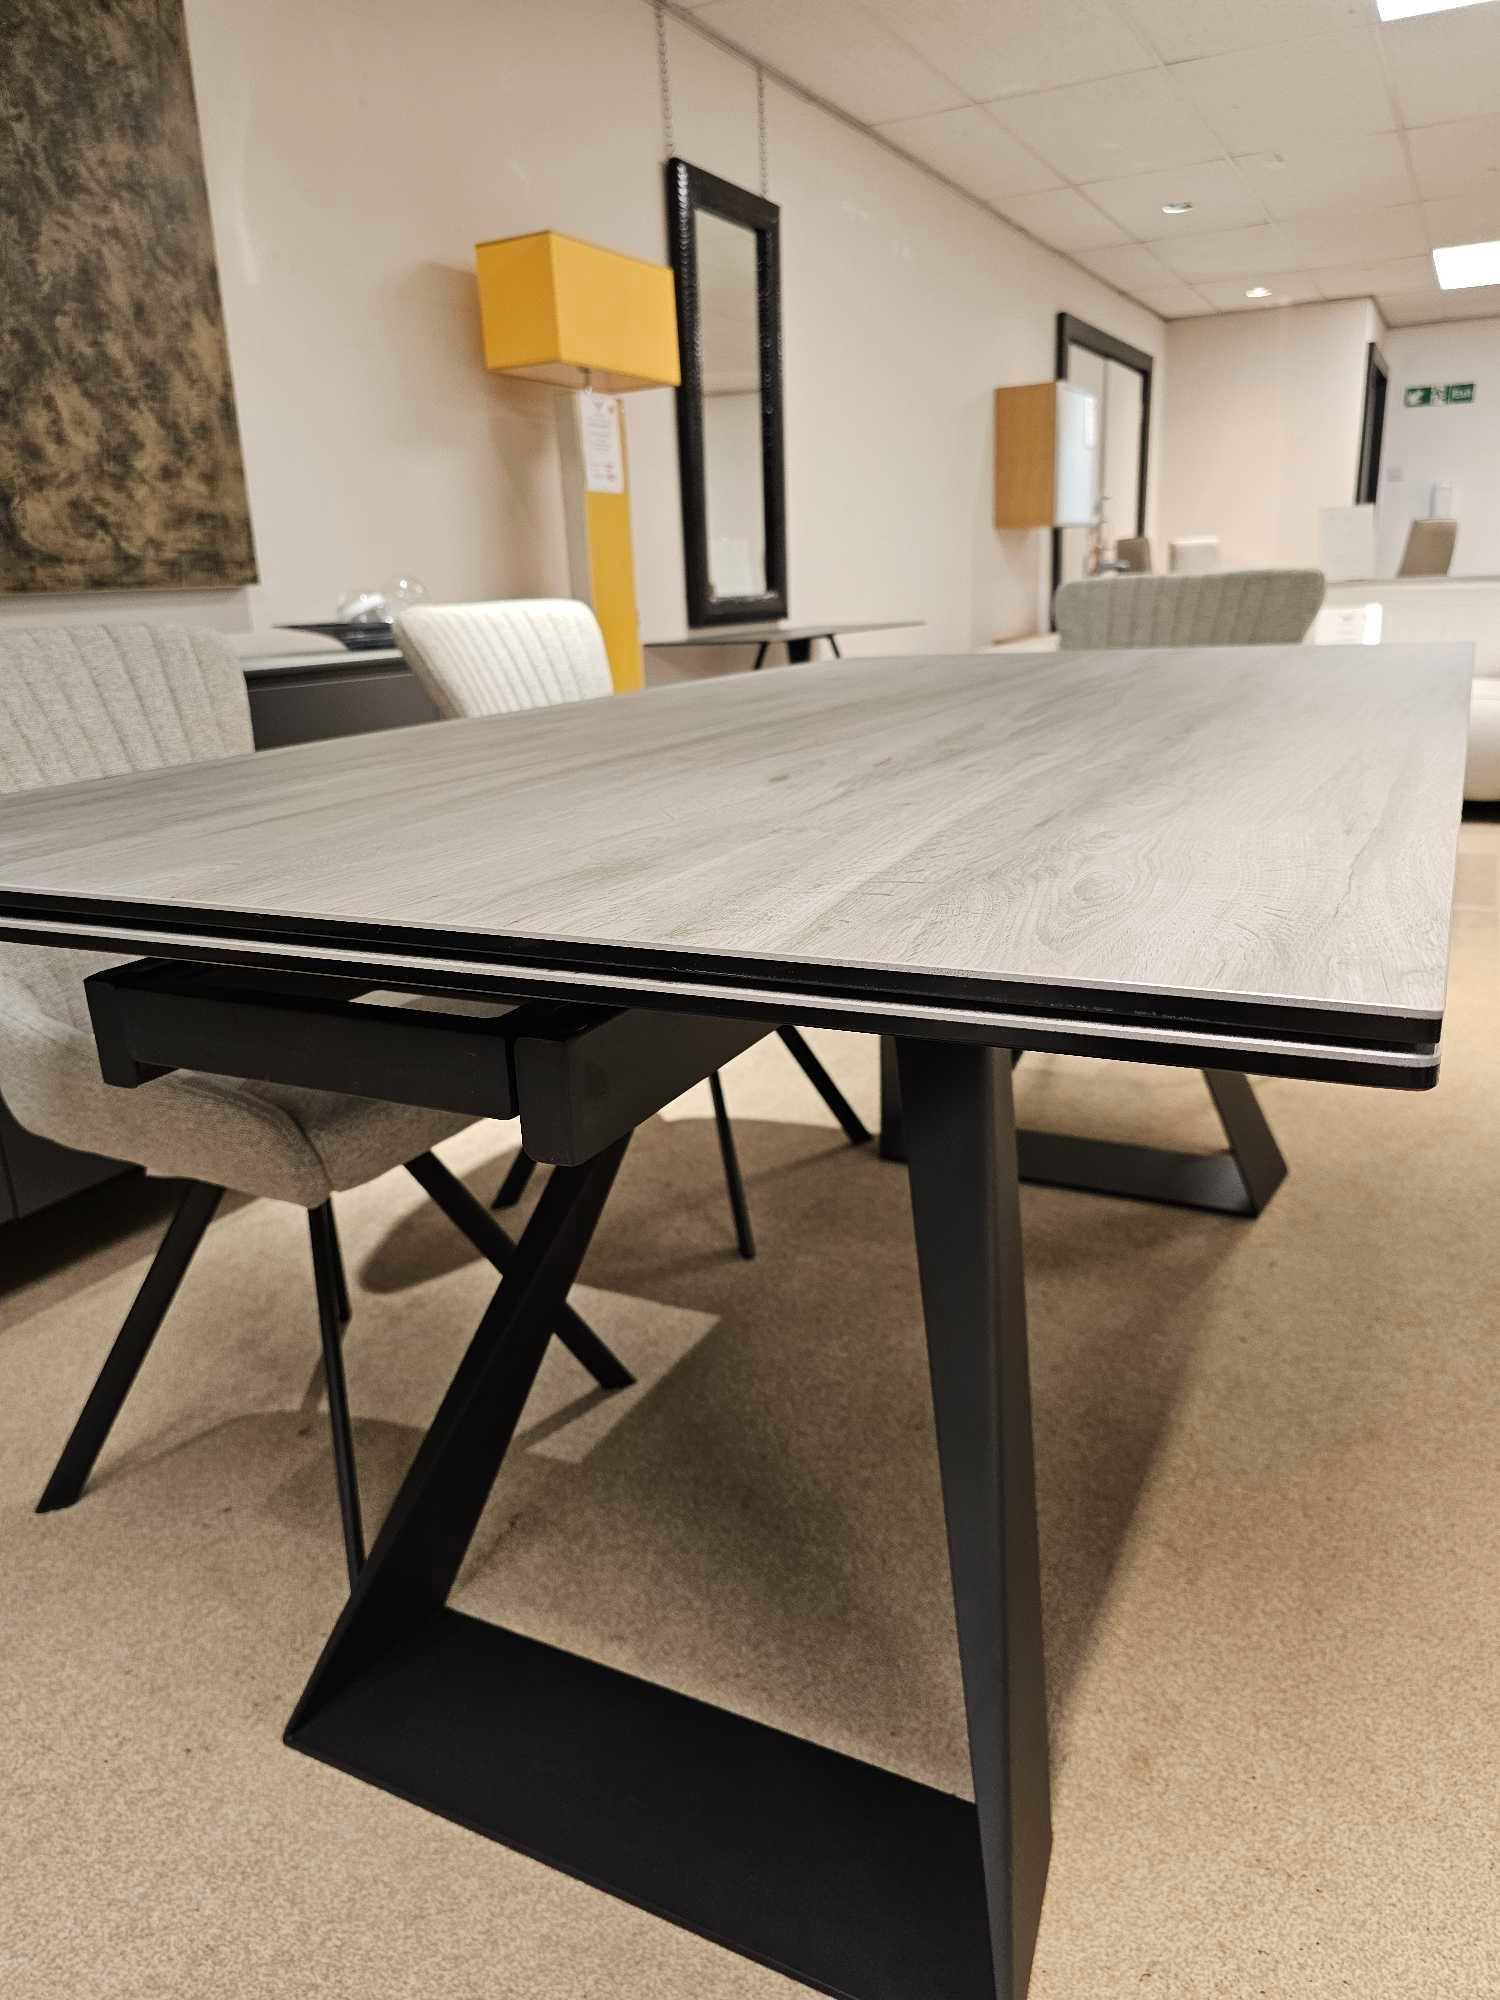 Spartan Dining Table by Kesterport The Spartan Dining Table is part of a sophisticated collection of - Image 10 of 12